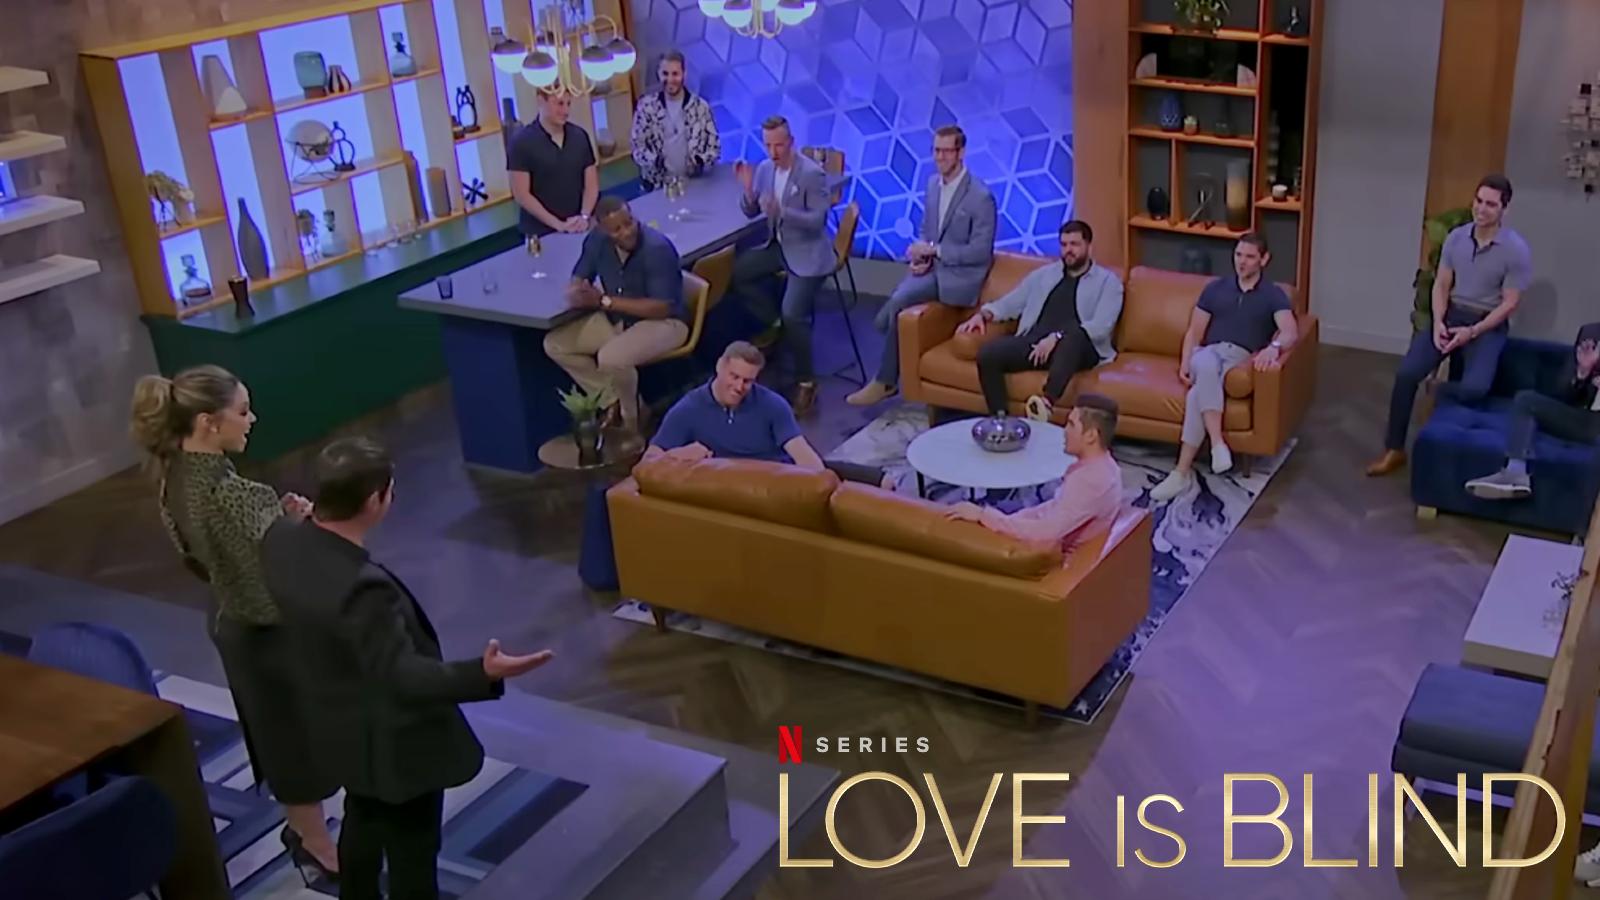 Love is Blind contestants